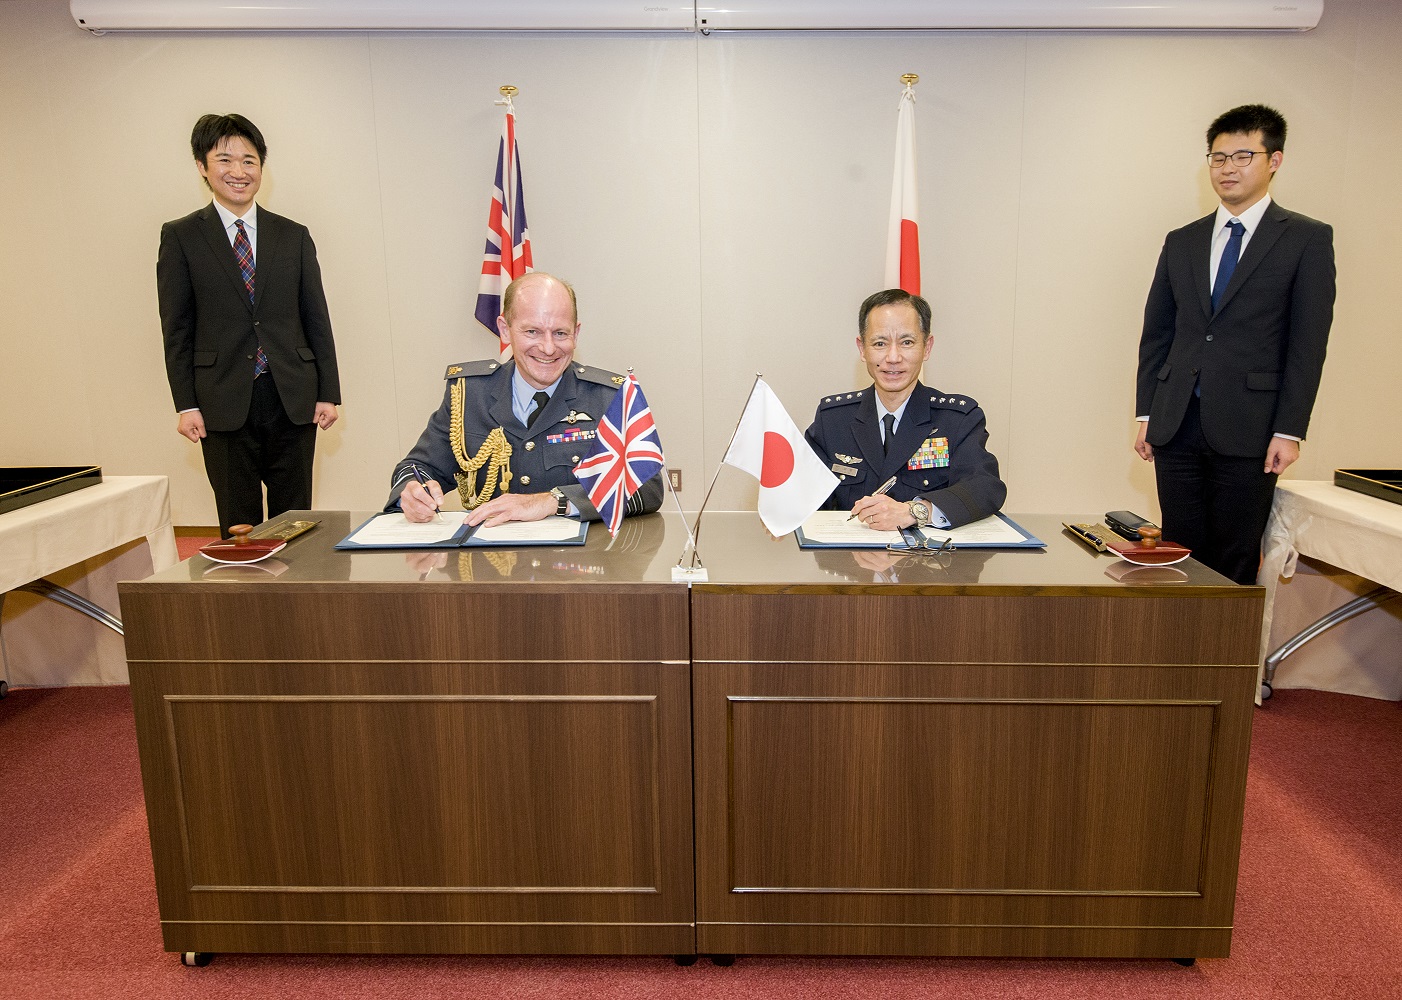 Image shows RAF Chief of Air Staff with Japan Air Self Defence Force, sat at a table signing paper.